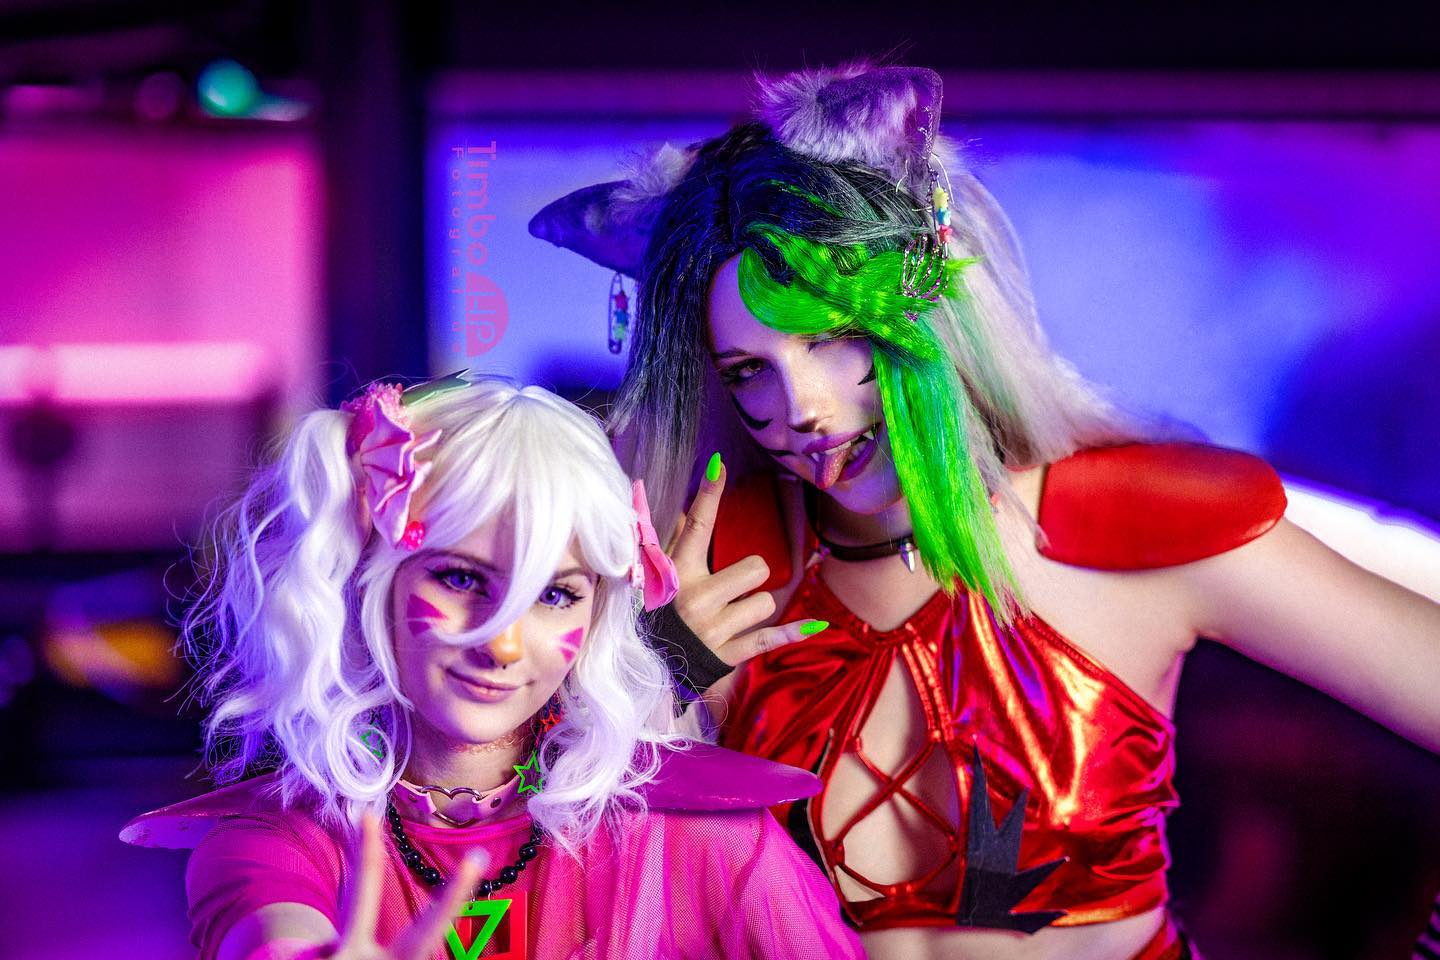 "Hey, I'm Roxanne Wolf! If you're looking for high-speed motor mayhem, Roxy Raceway is the place to be! Sign up today and be a winner! Nobody likes a loser."
•
•
Characters:
Roxanne Wolf - @polymerfuchs 
Glamrock Chica - @ganyux_ 
Game: Five Nights at Freddy‘s Security Breach
📸&✏️: @timbo_hp_cosplayfotograf 
•
•
#fnaf #fnafsecuritybreach #fivenightsatfreddys #fnafcosplay #fnafsecuritybreachcosplay #fivenightsatfreddyscosplay #fivenightsatfreddyssecuritybreach #roxannewolf #roxannewolfcosplay #roxy #roxycosplay #chica #chicacosplay #chicafnaf #glamrockchica #glamrockchicacosplay #cosplay #germancosplay